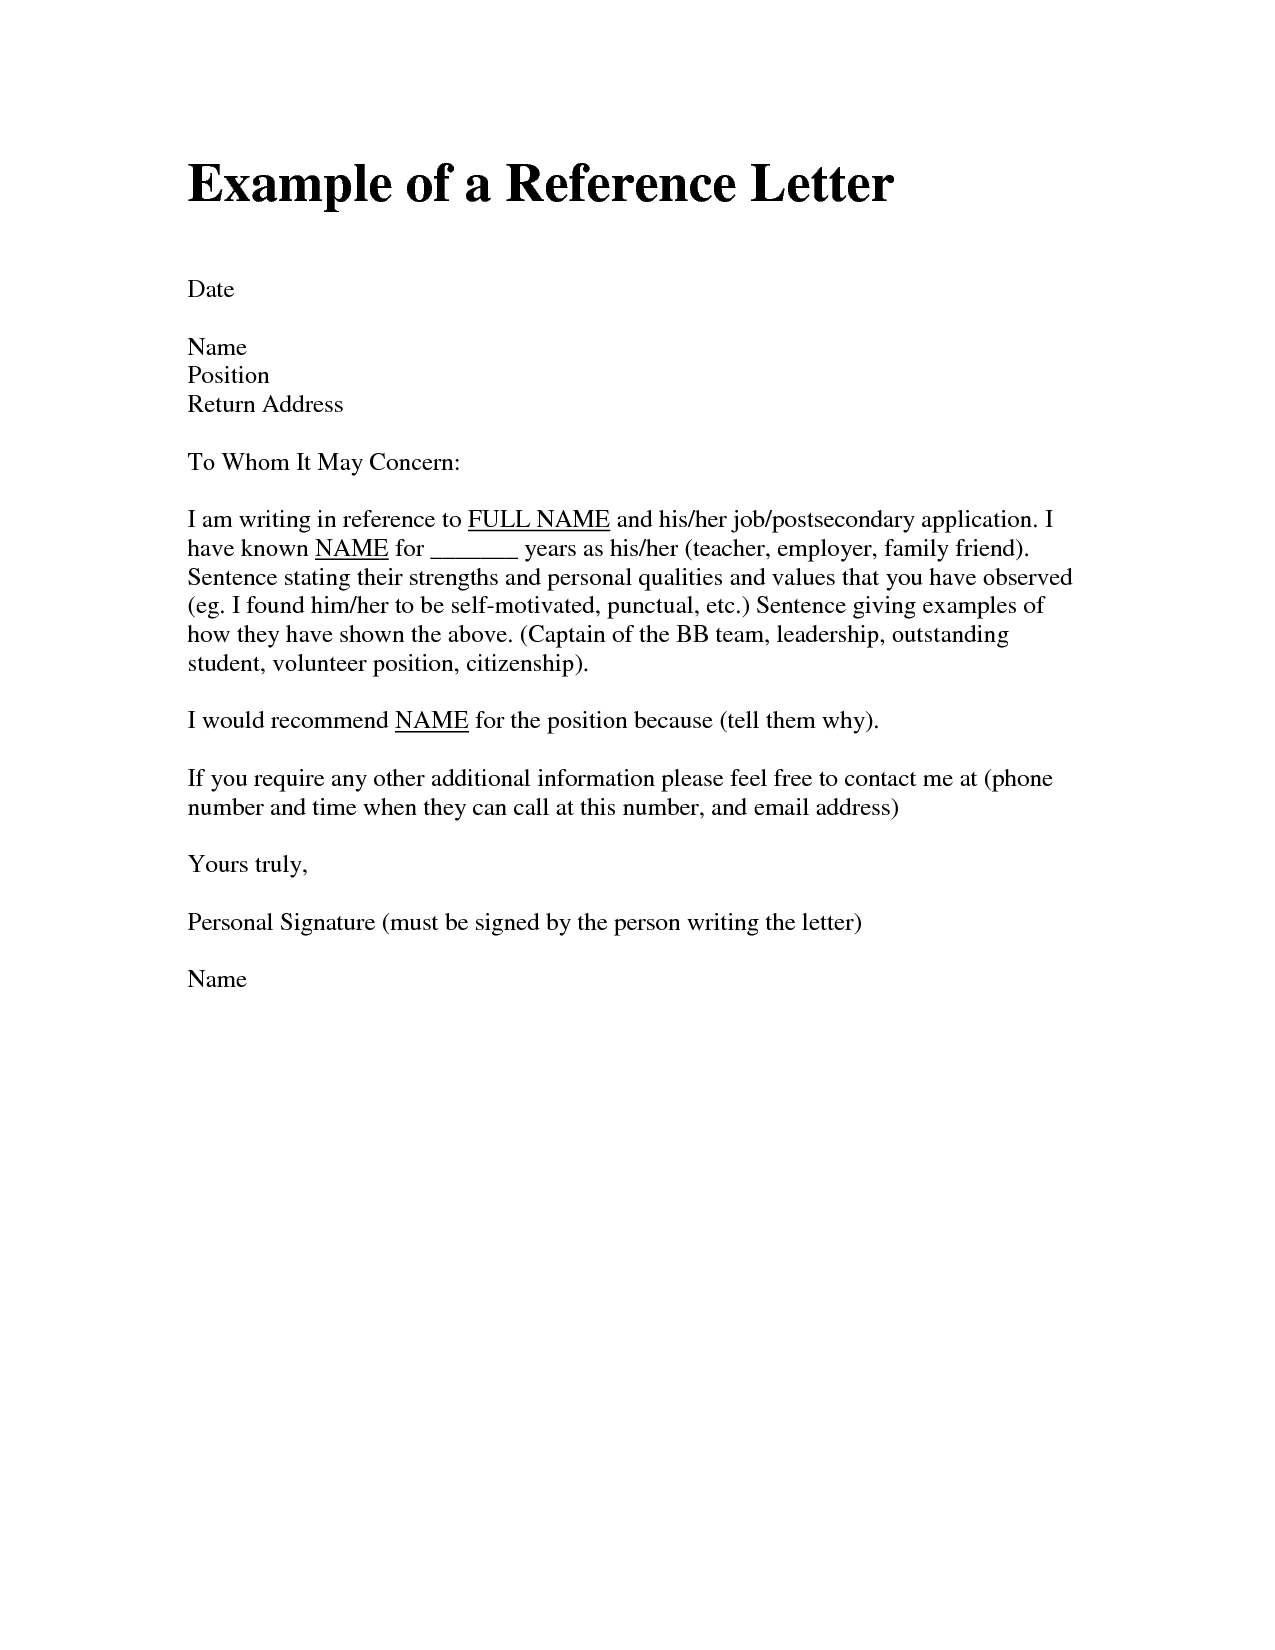 Write Recommendation Letter For Friend Enom with regard to dimensions 1275 X 1650